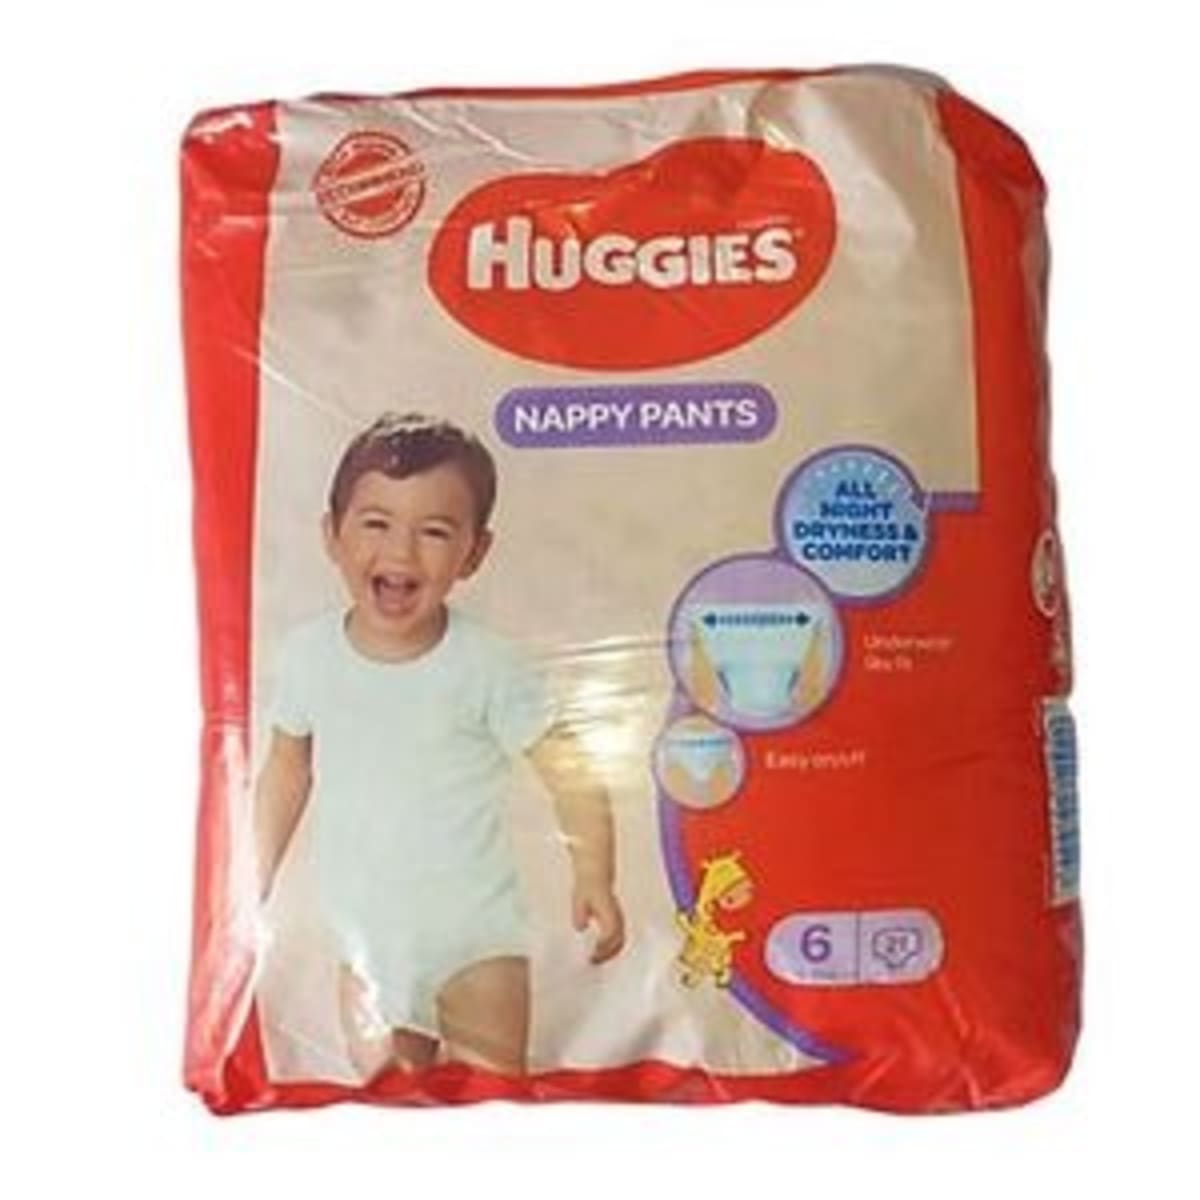 Huggies Nappy Pants- Size 6 X 4 - 15 to 25kg - 84 count